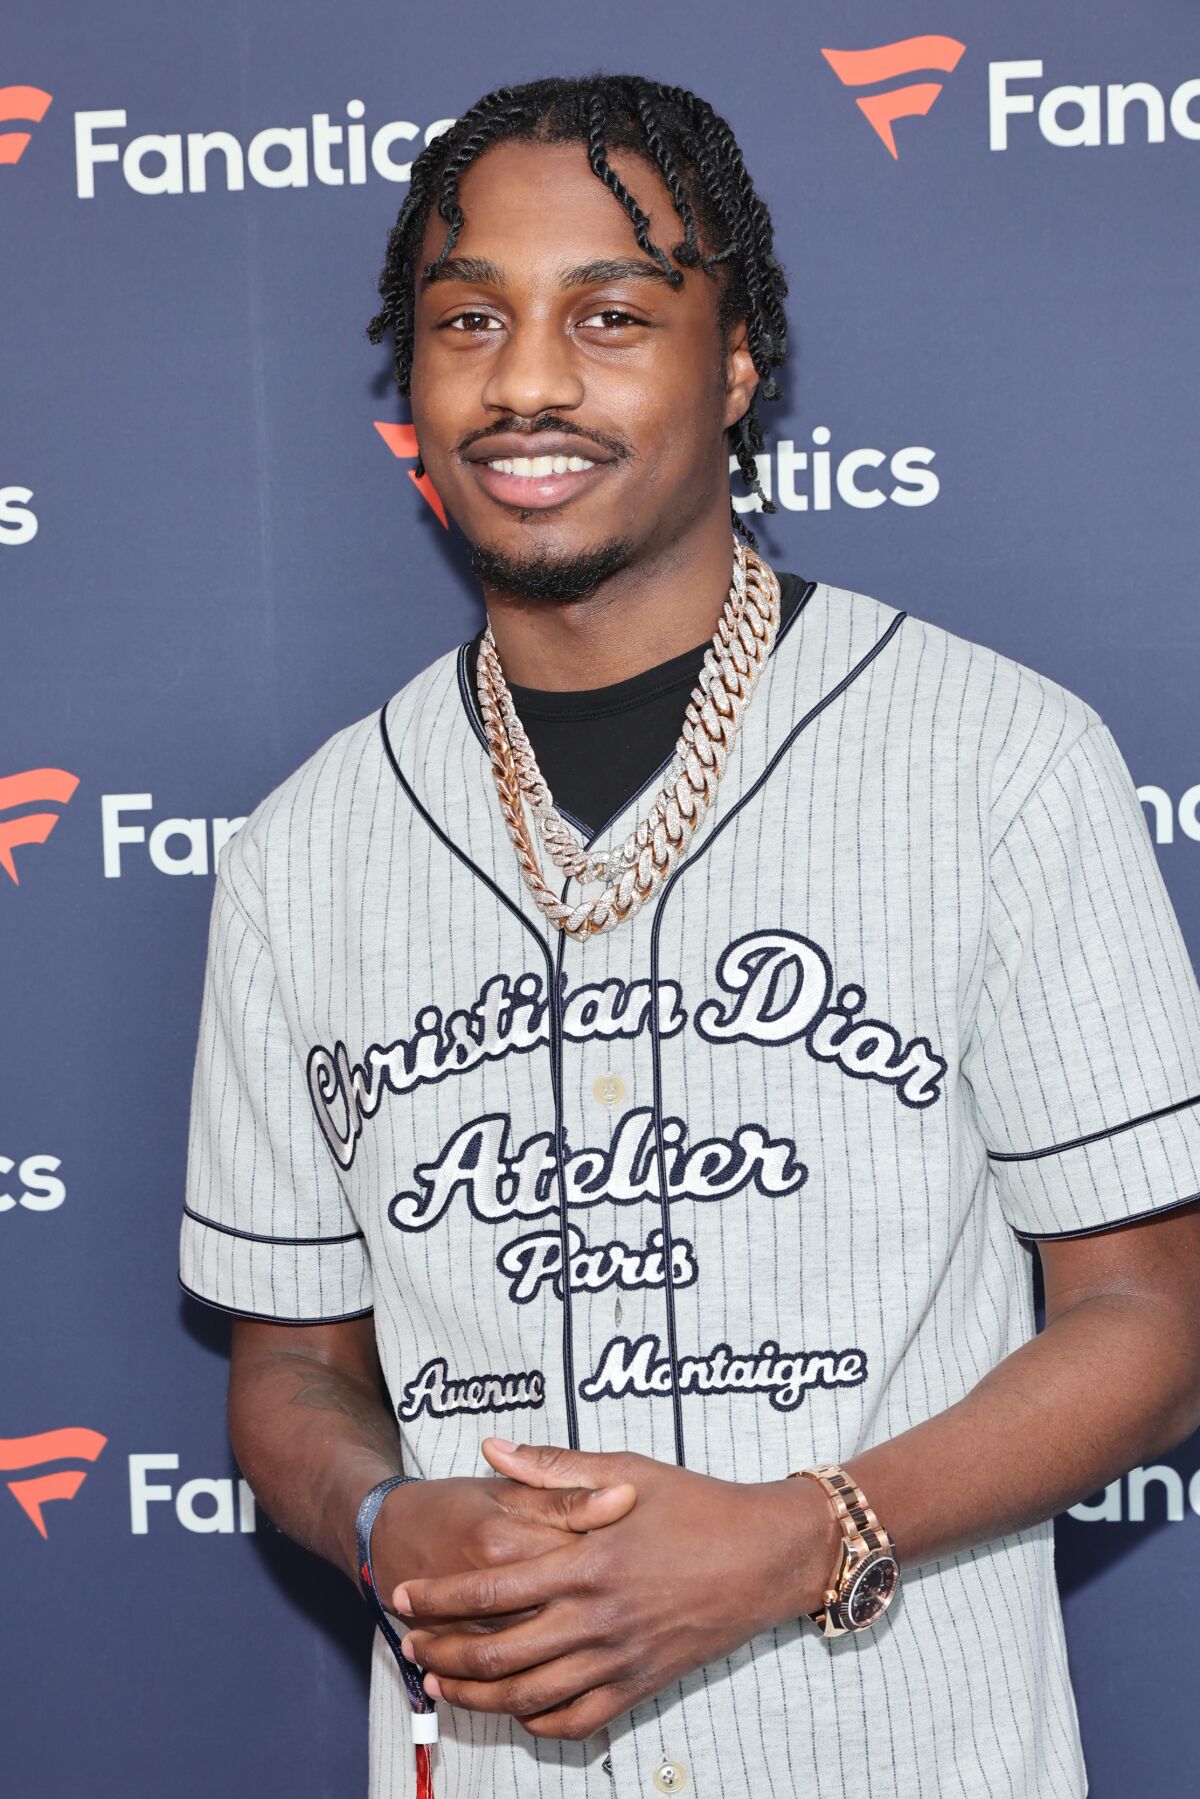 A man in a fashionable baseball jersey smiles while clasping his hands together